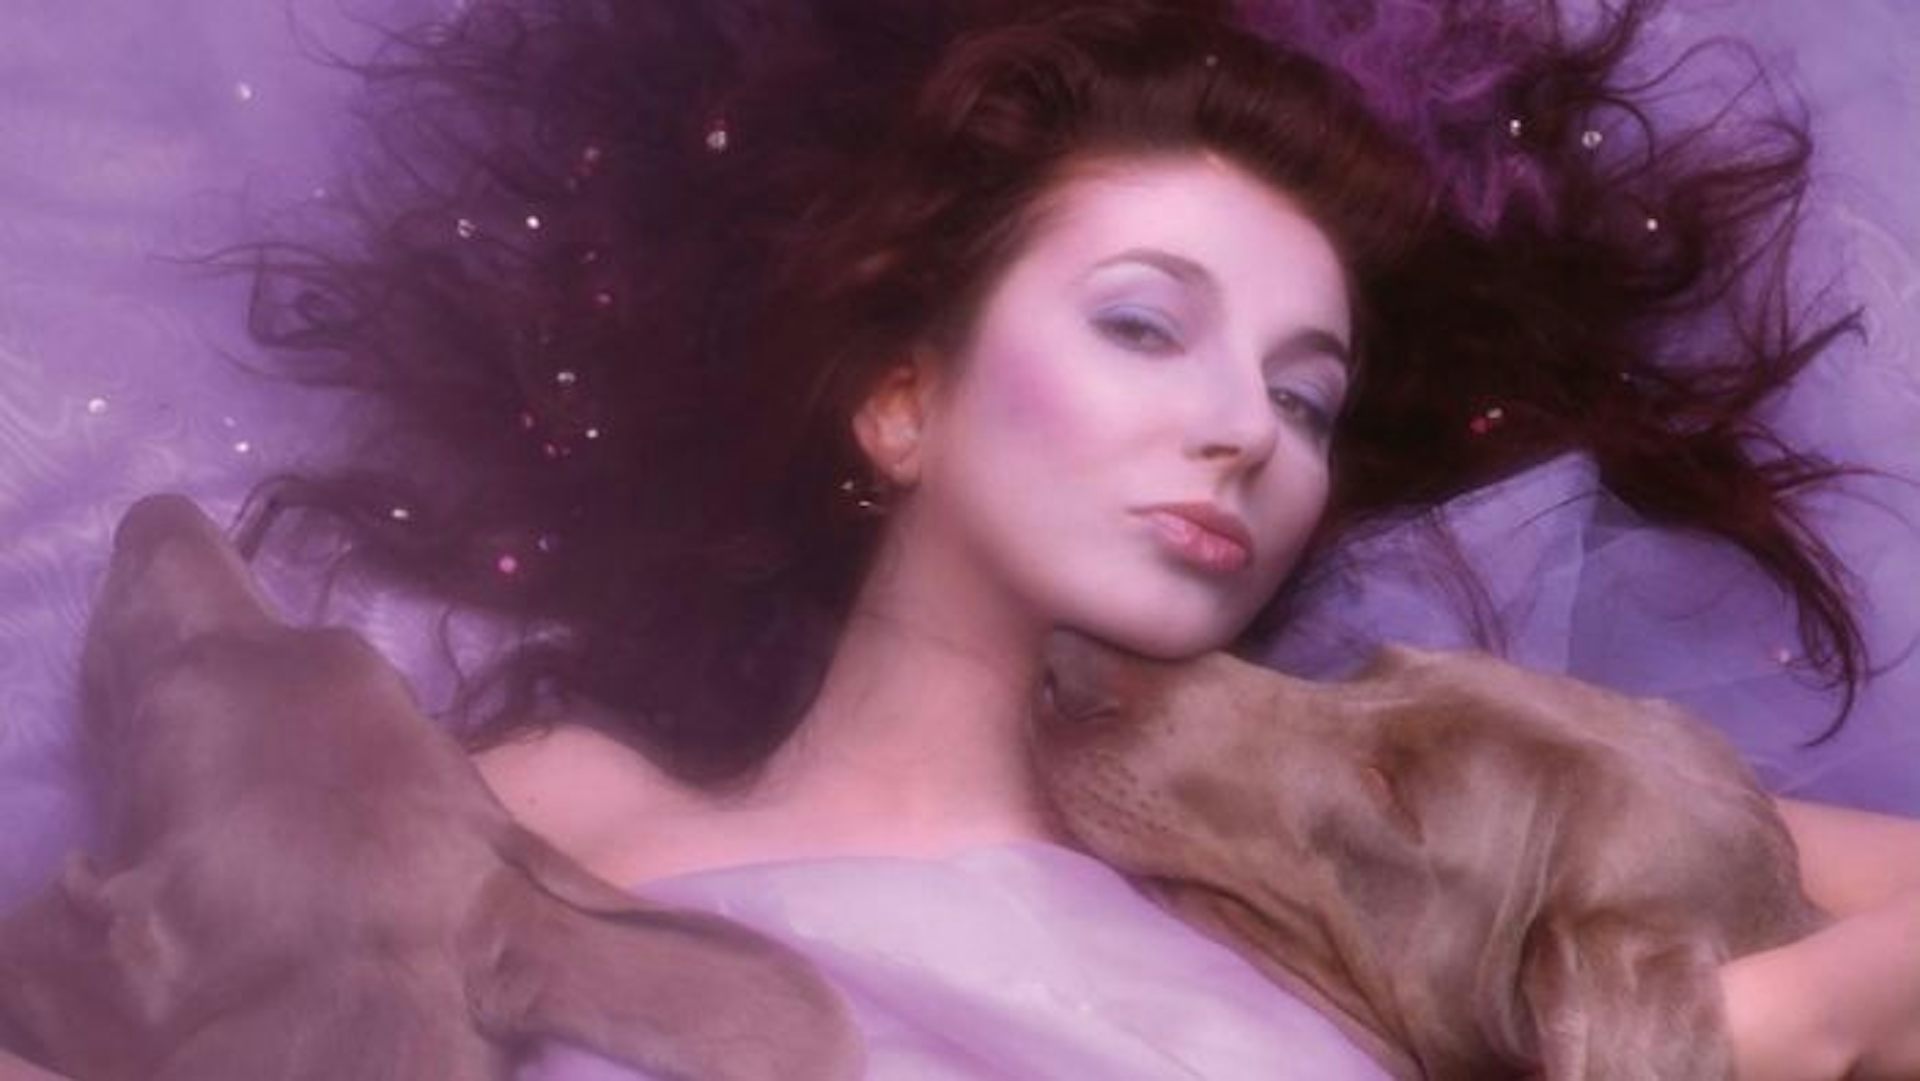 Ethereal, evocative, and inventive: why the music of Kate Bush